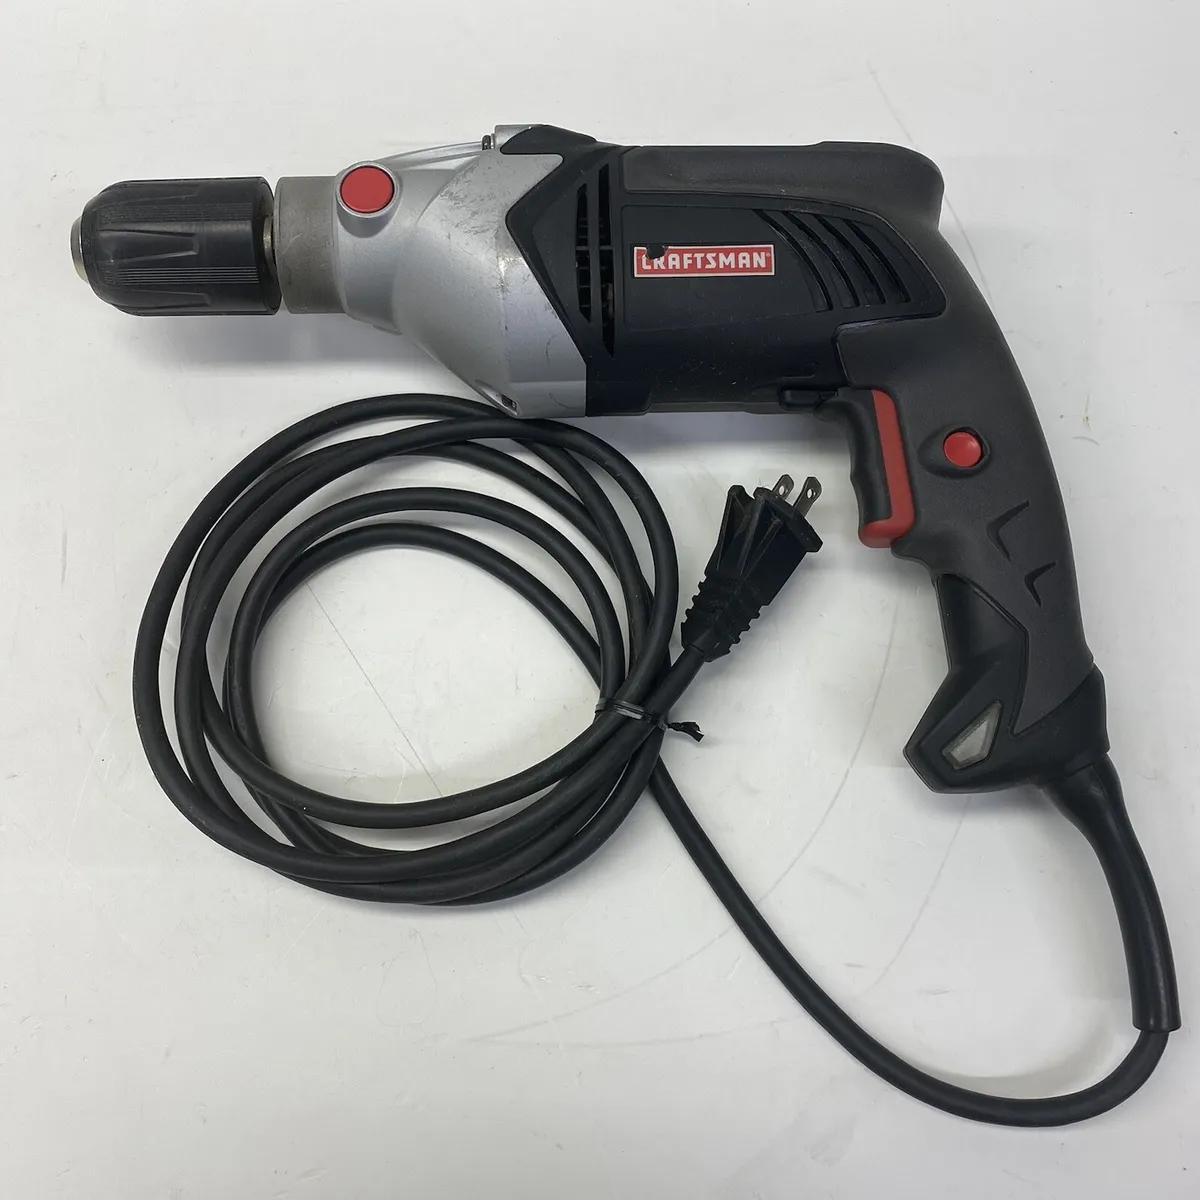 Benefits of a Corded Hammer Drill with Keyless Chuck